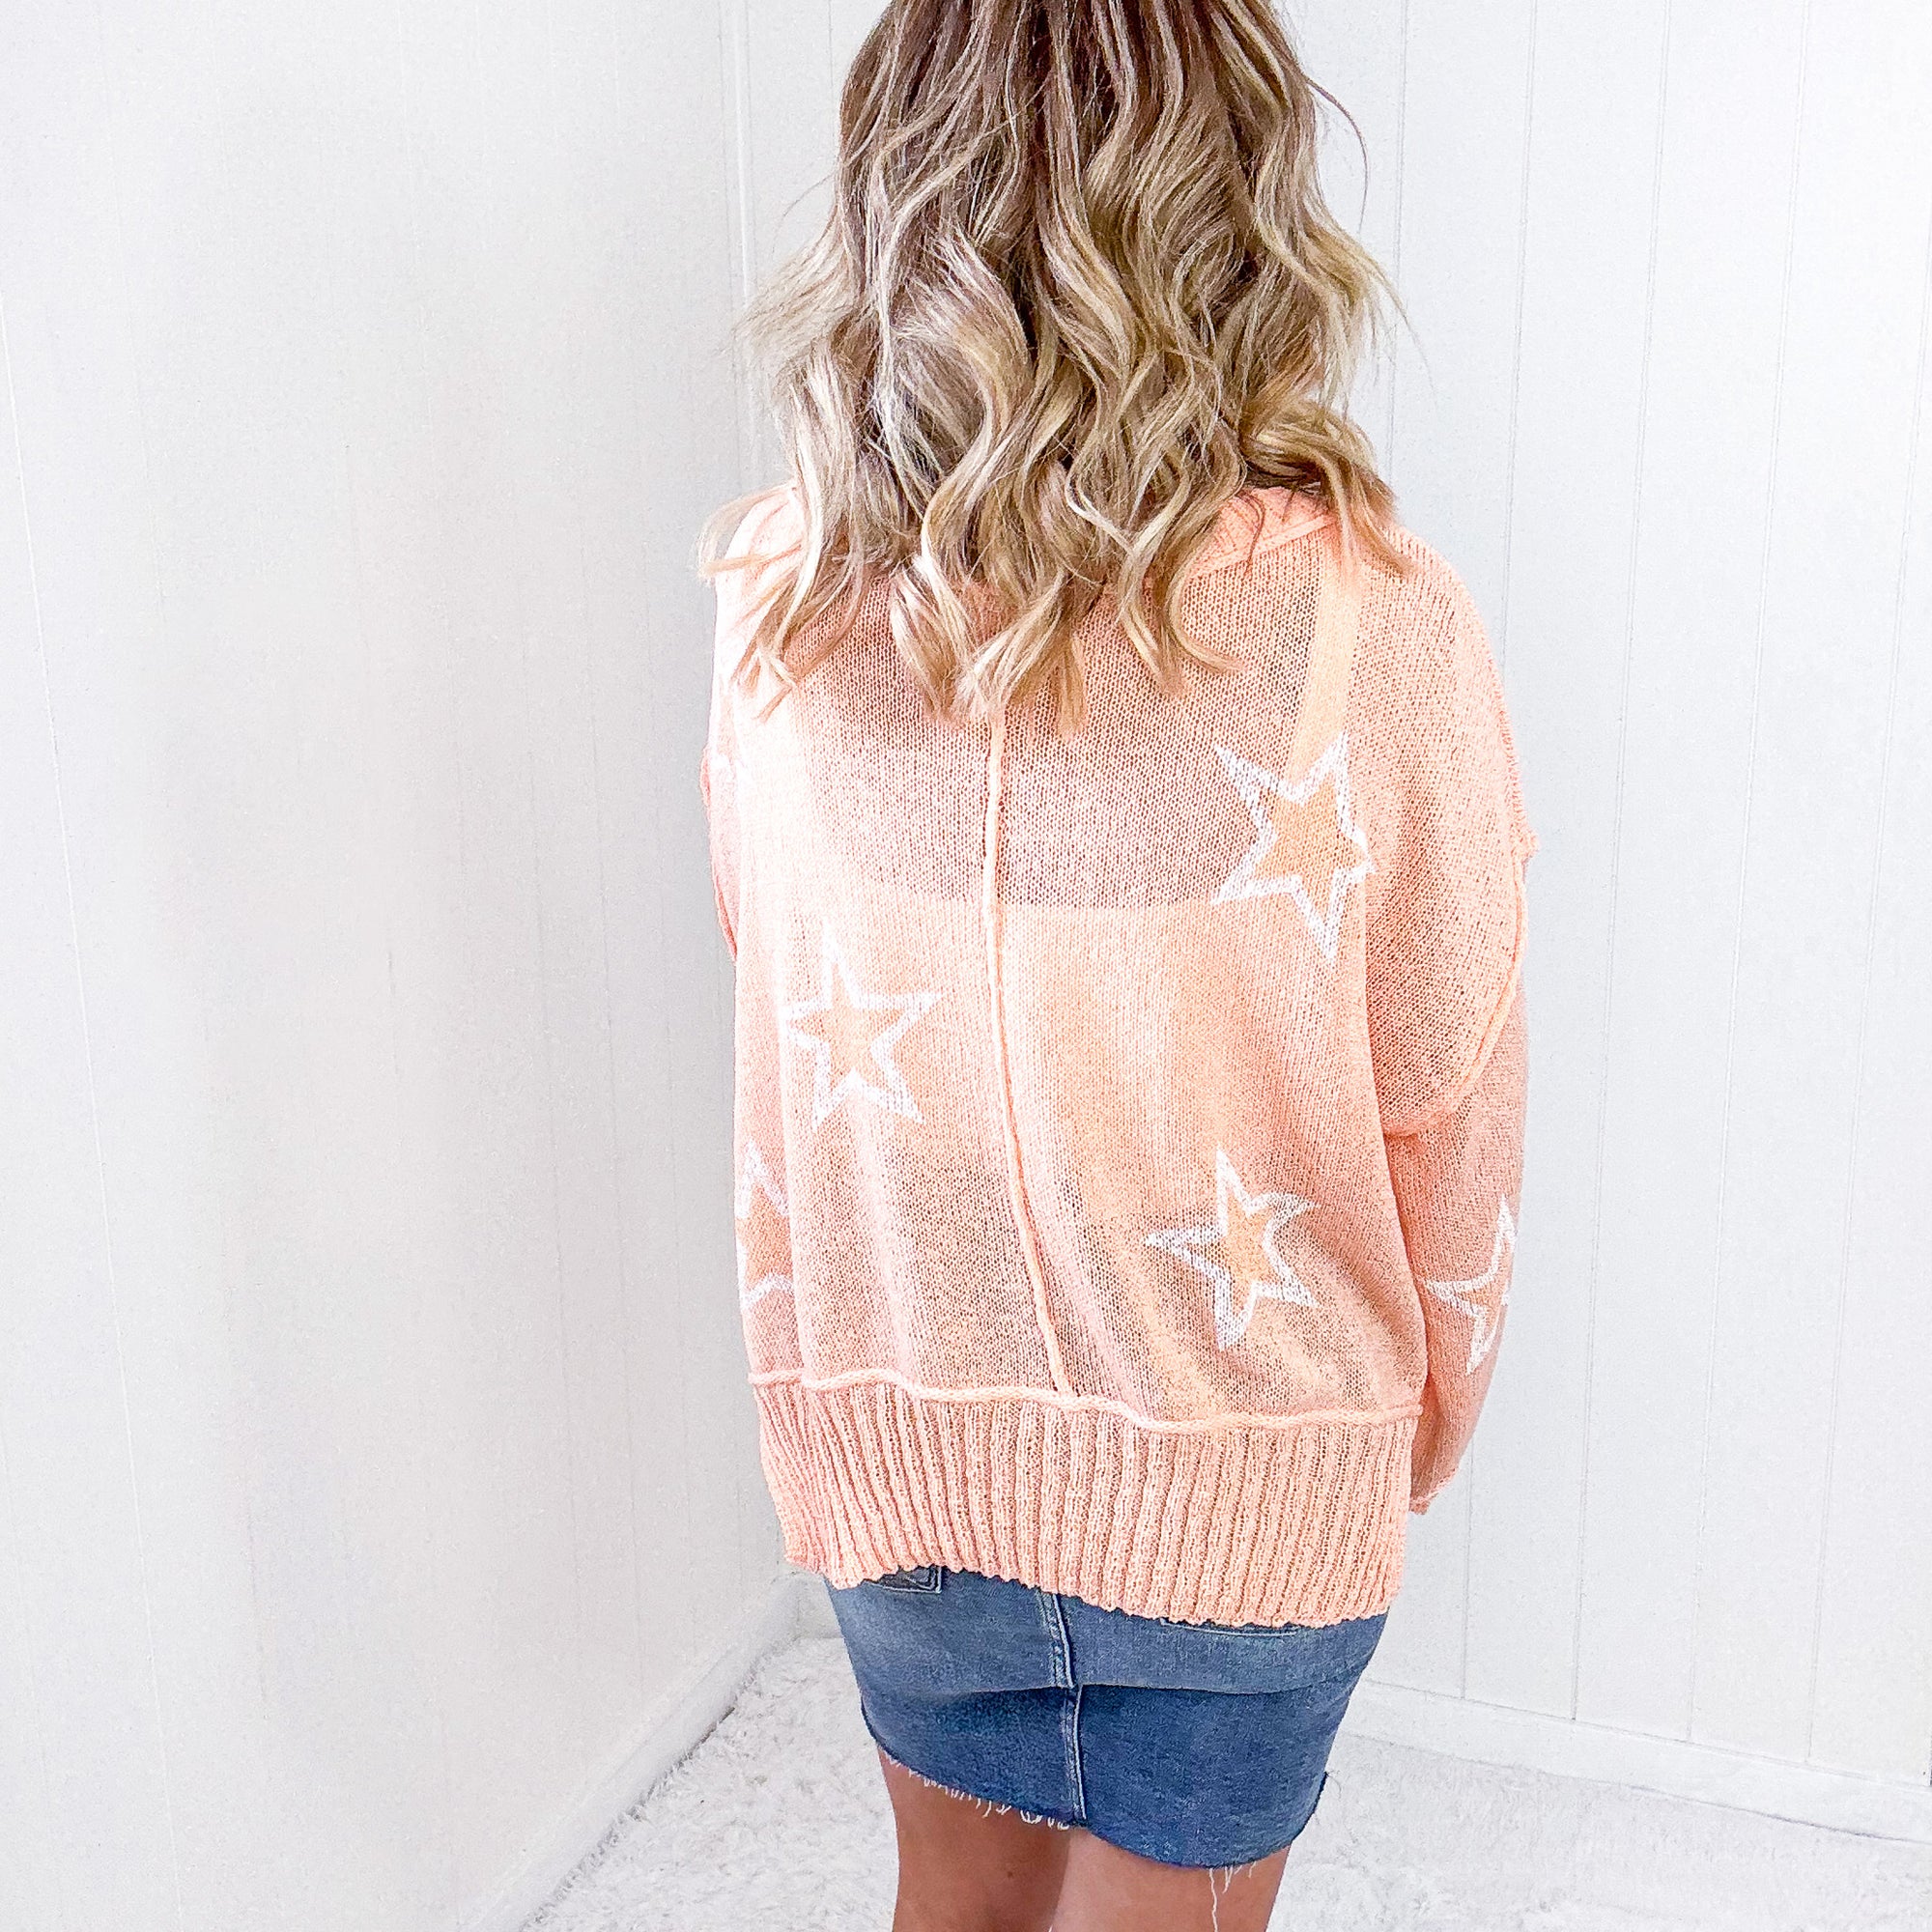 POL Star Crazy Sherbet Sheer Spring Sweater - Boujee Boutique 